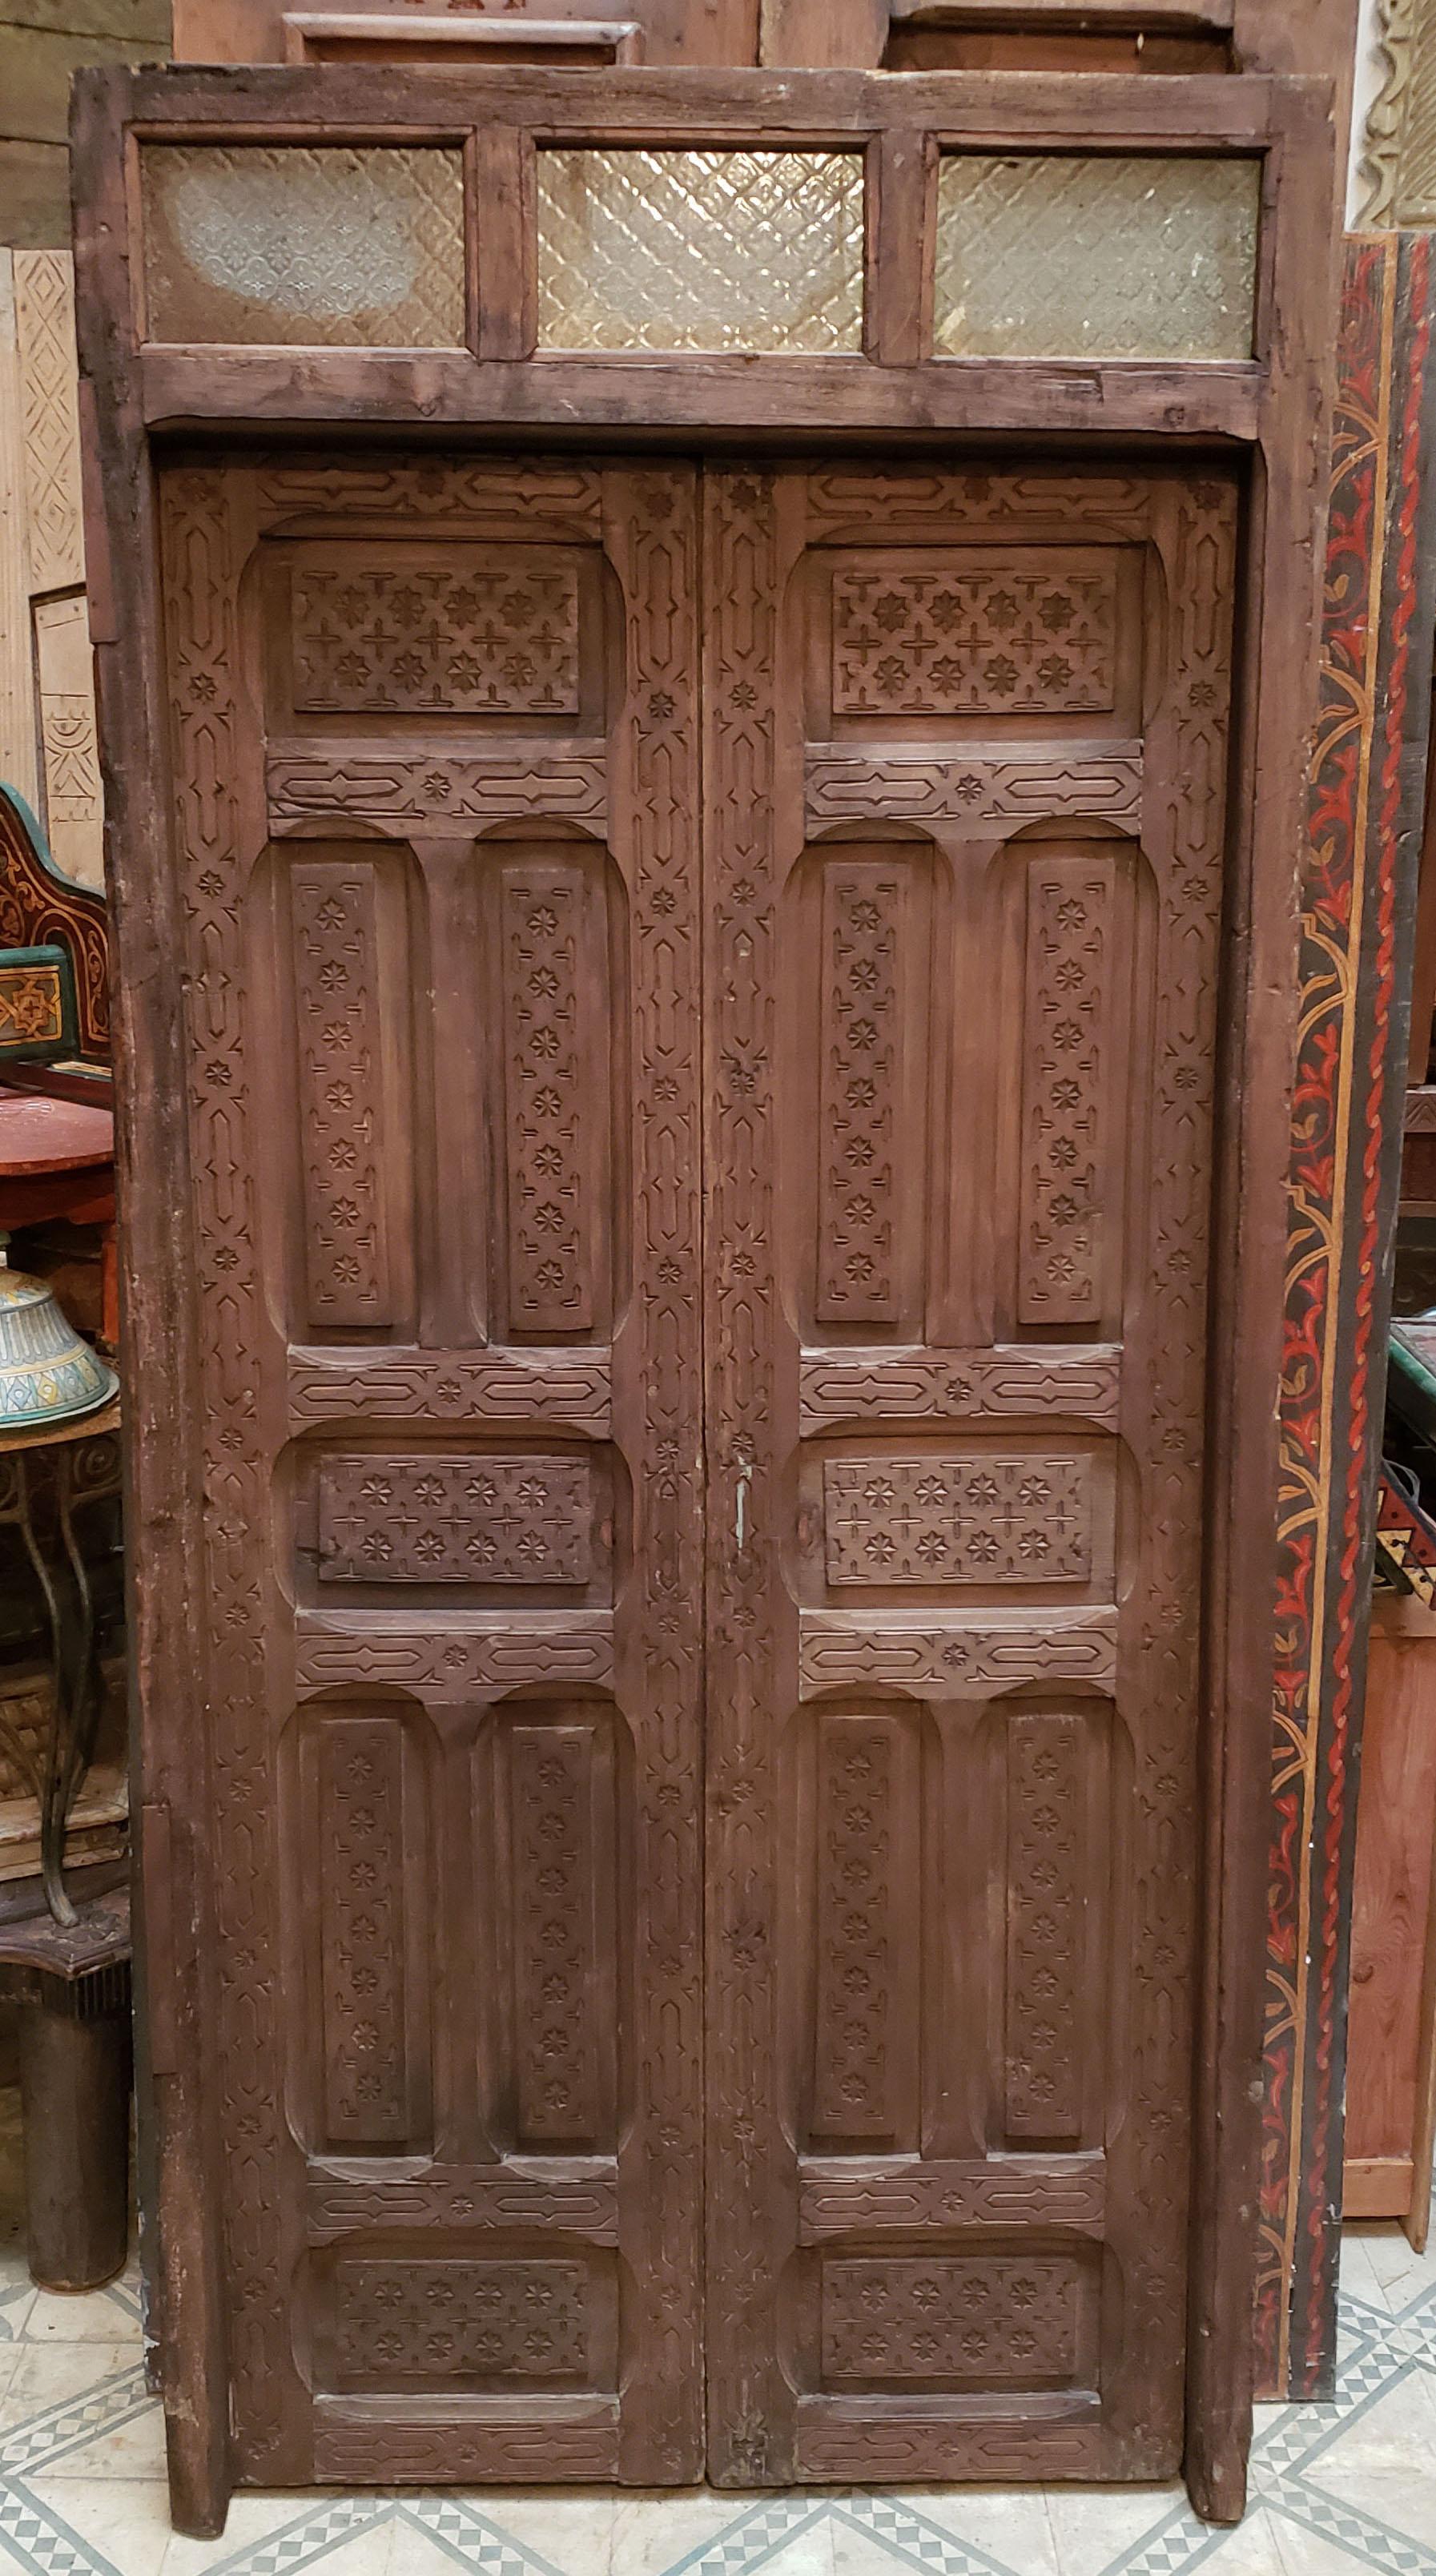 Another amazing single panel Moroccan door measuring approximately 79